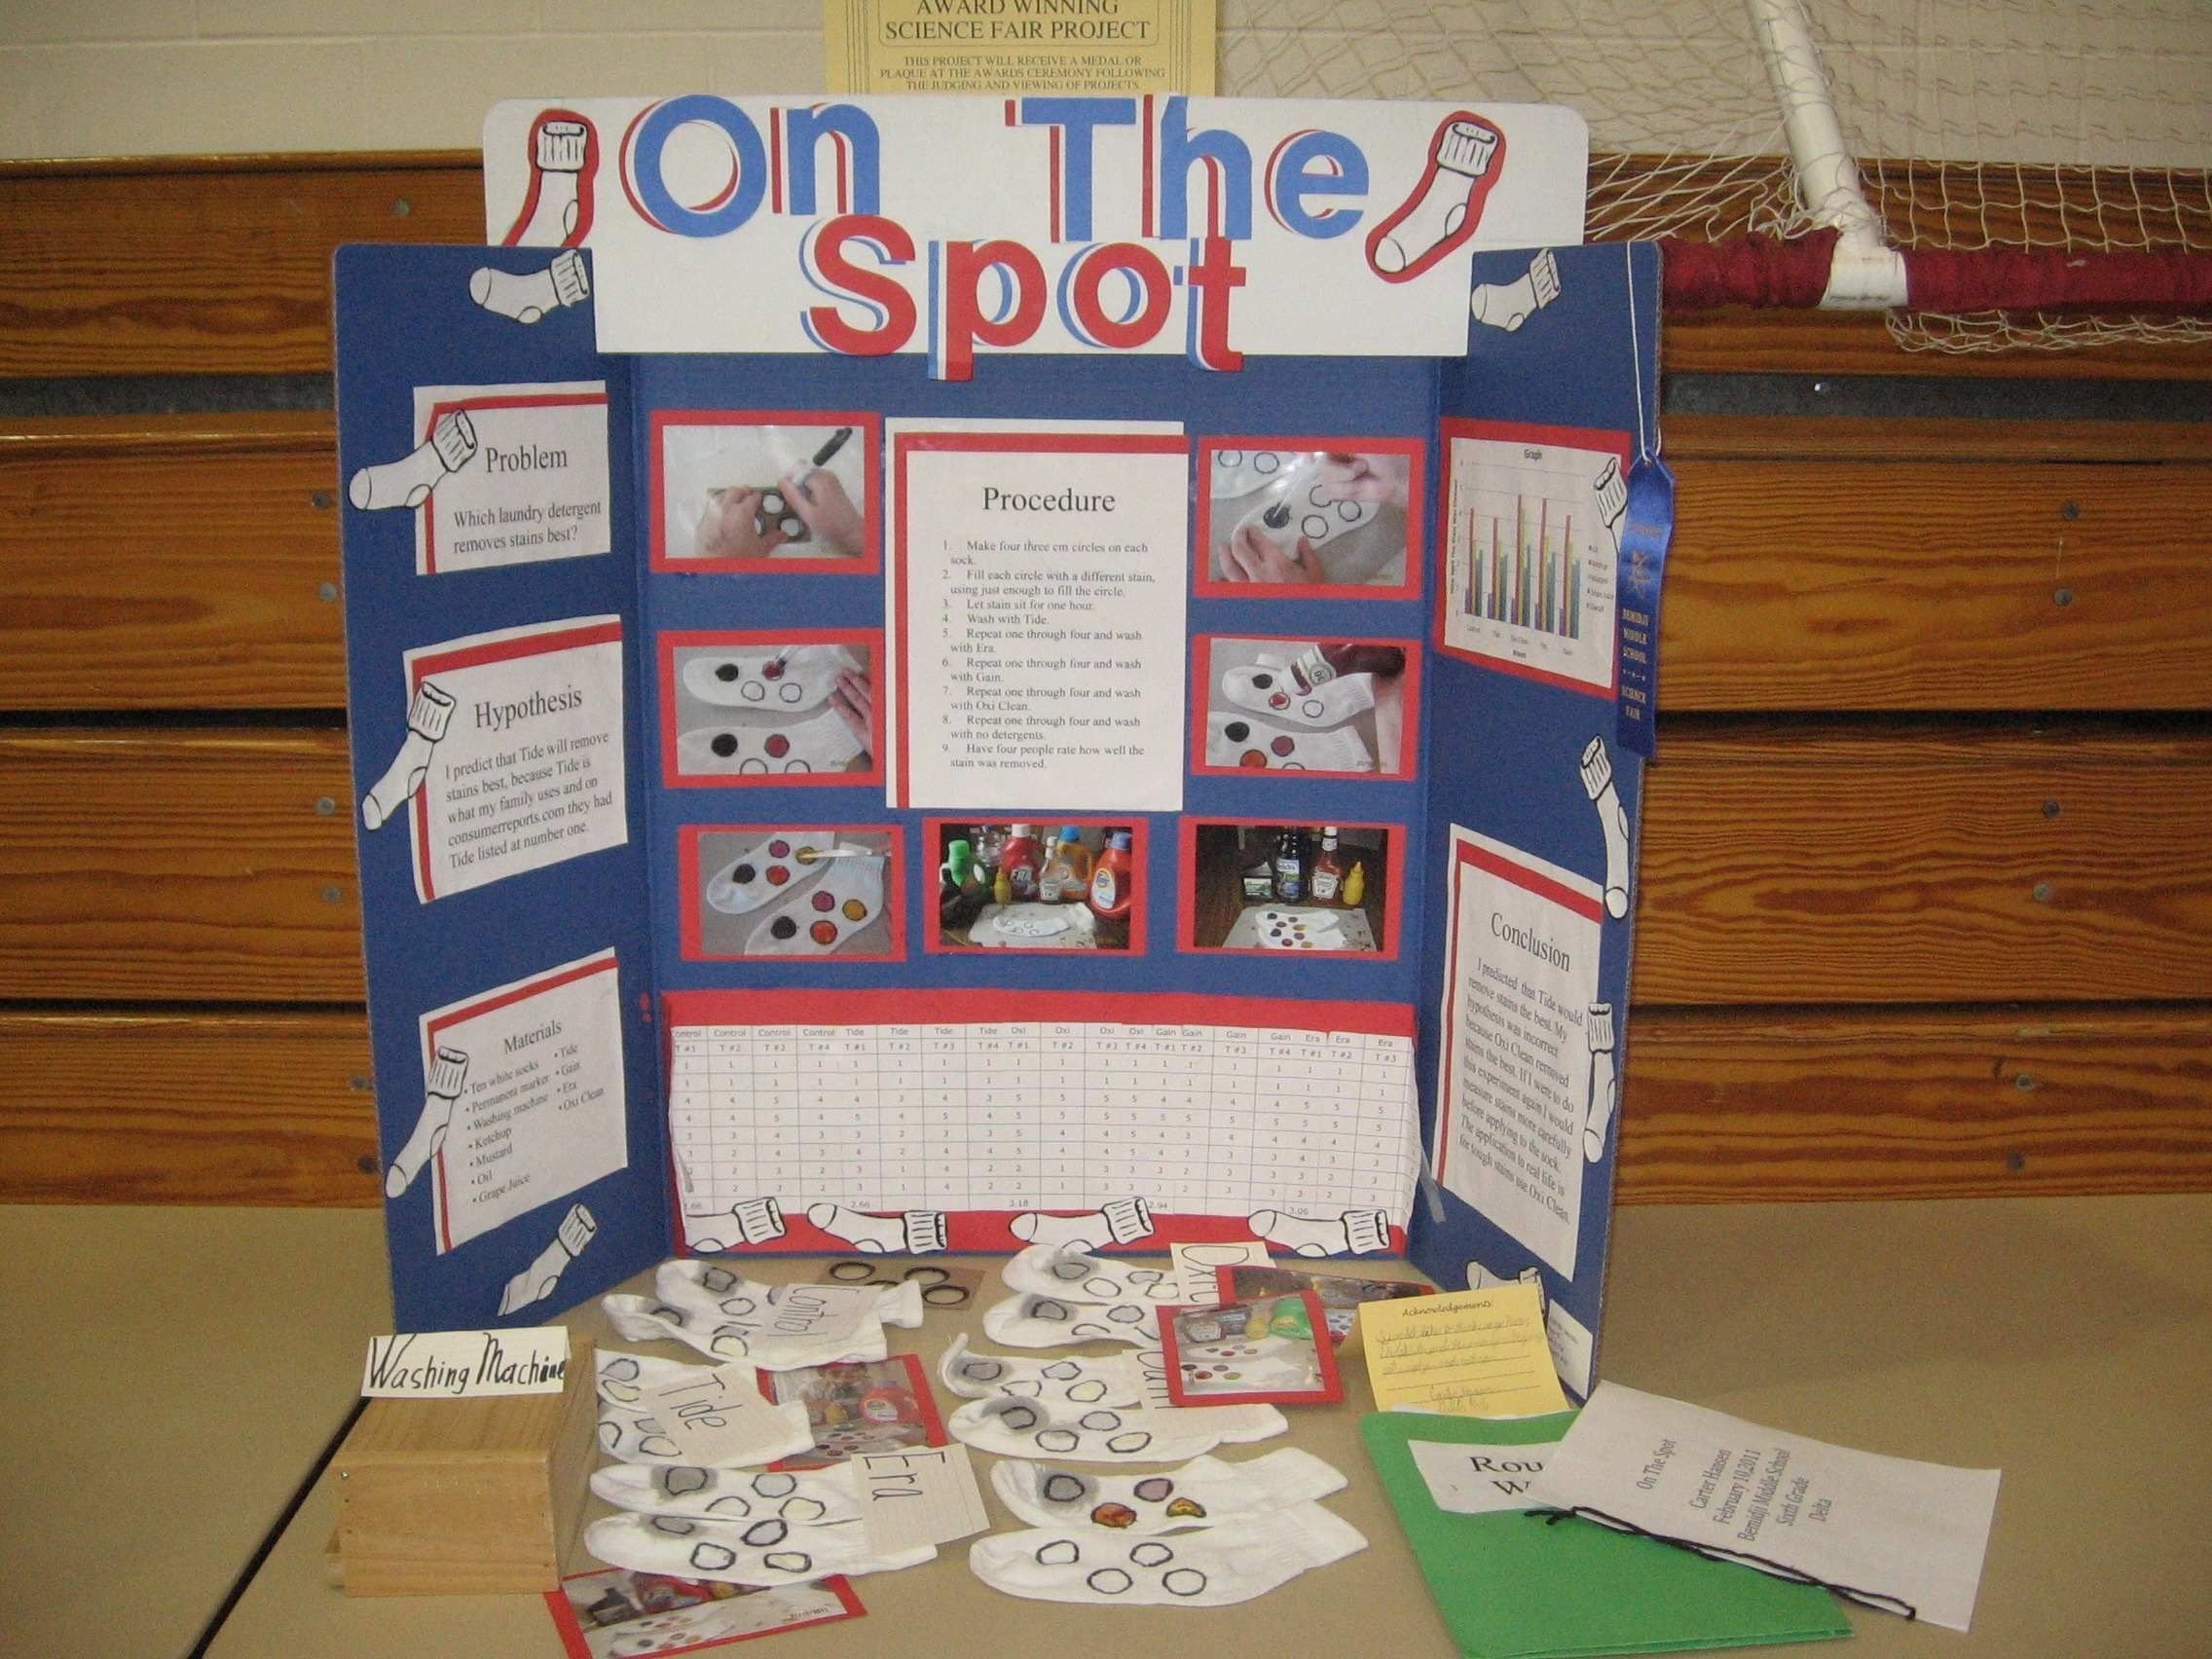 10 Awesome Cool Science Fair Projects Ideas ms bergs delta science bemidji k12 mn 41 2023